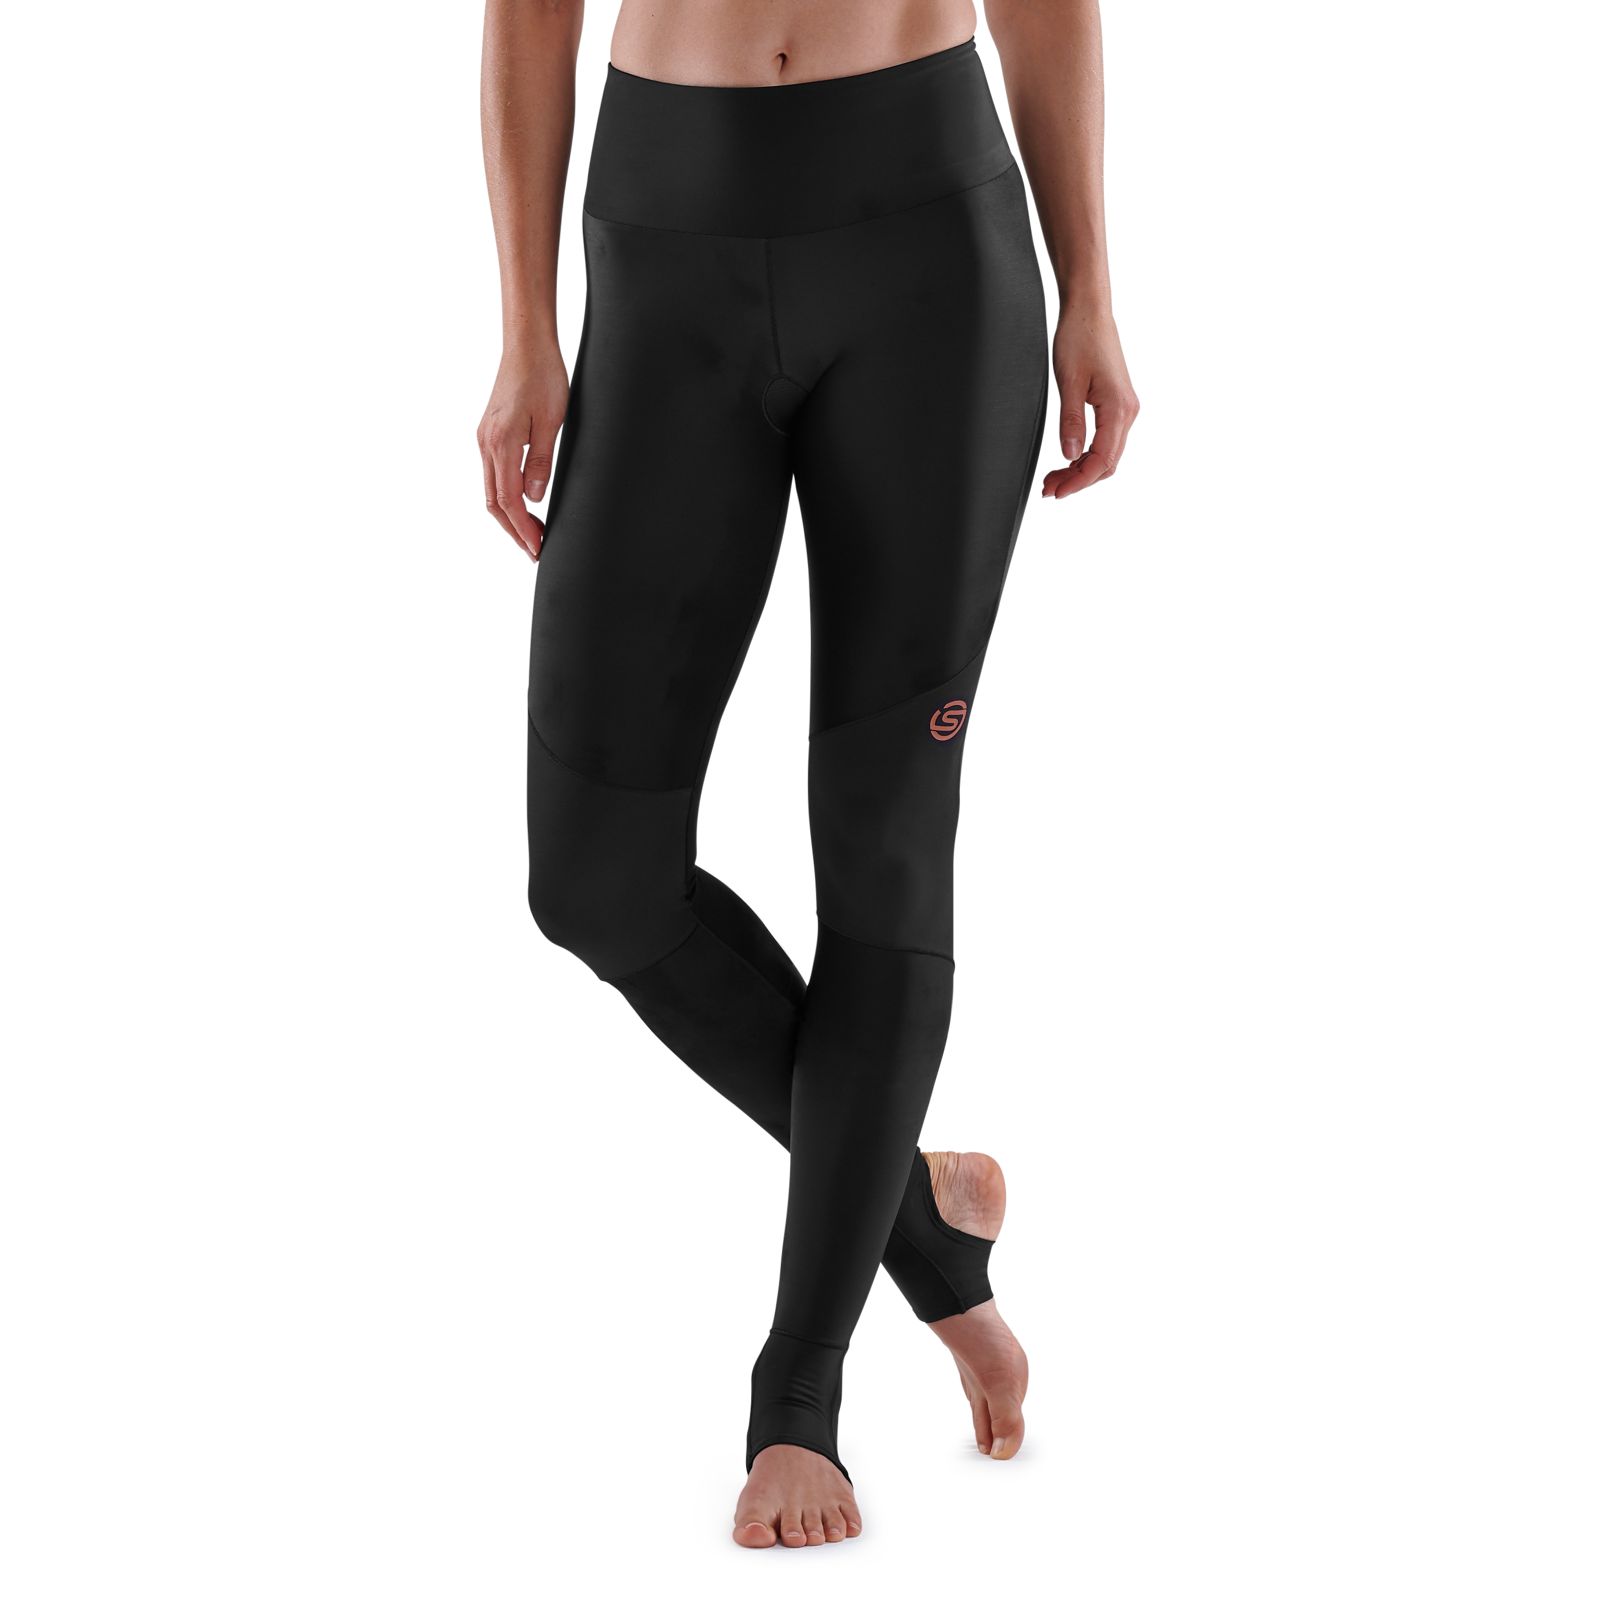 SKINS SERIES-5 WOMEN'S TRAVEL AND RECOVERY LONG TIGHTS BLACK - SKINS  Compression EU